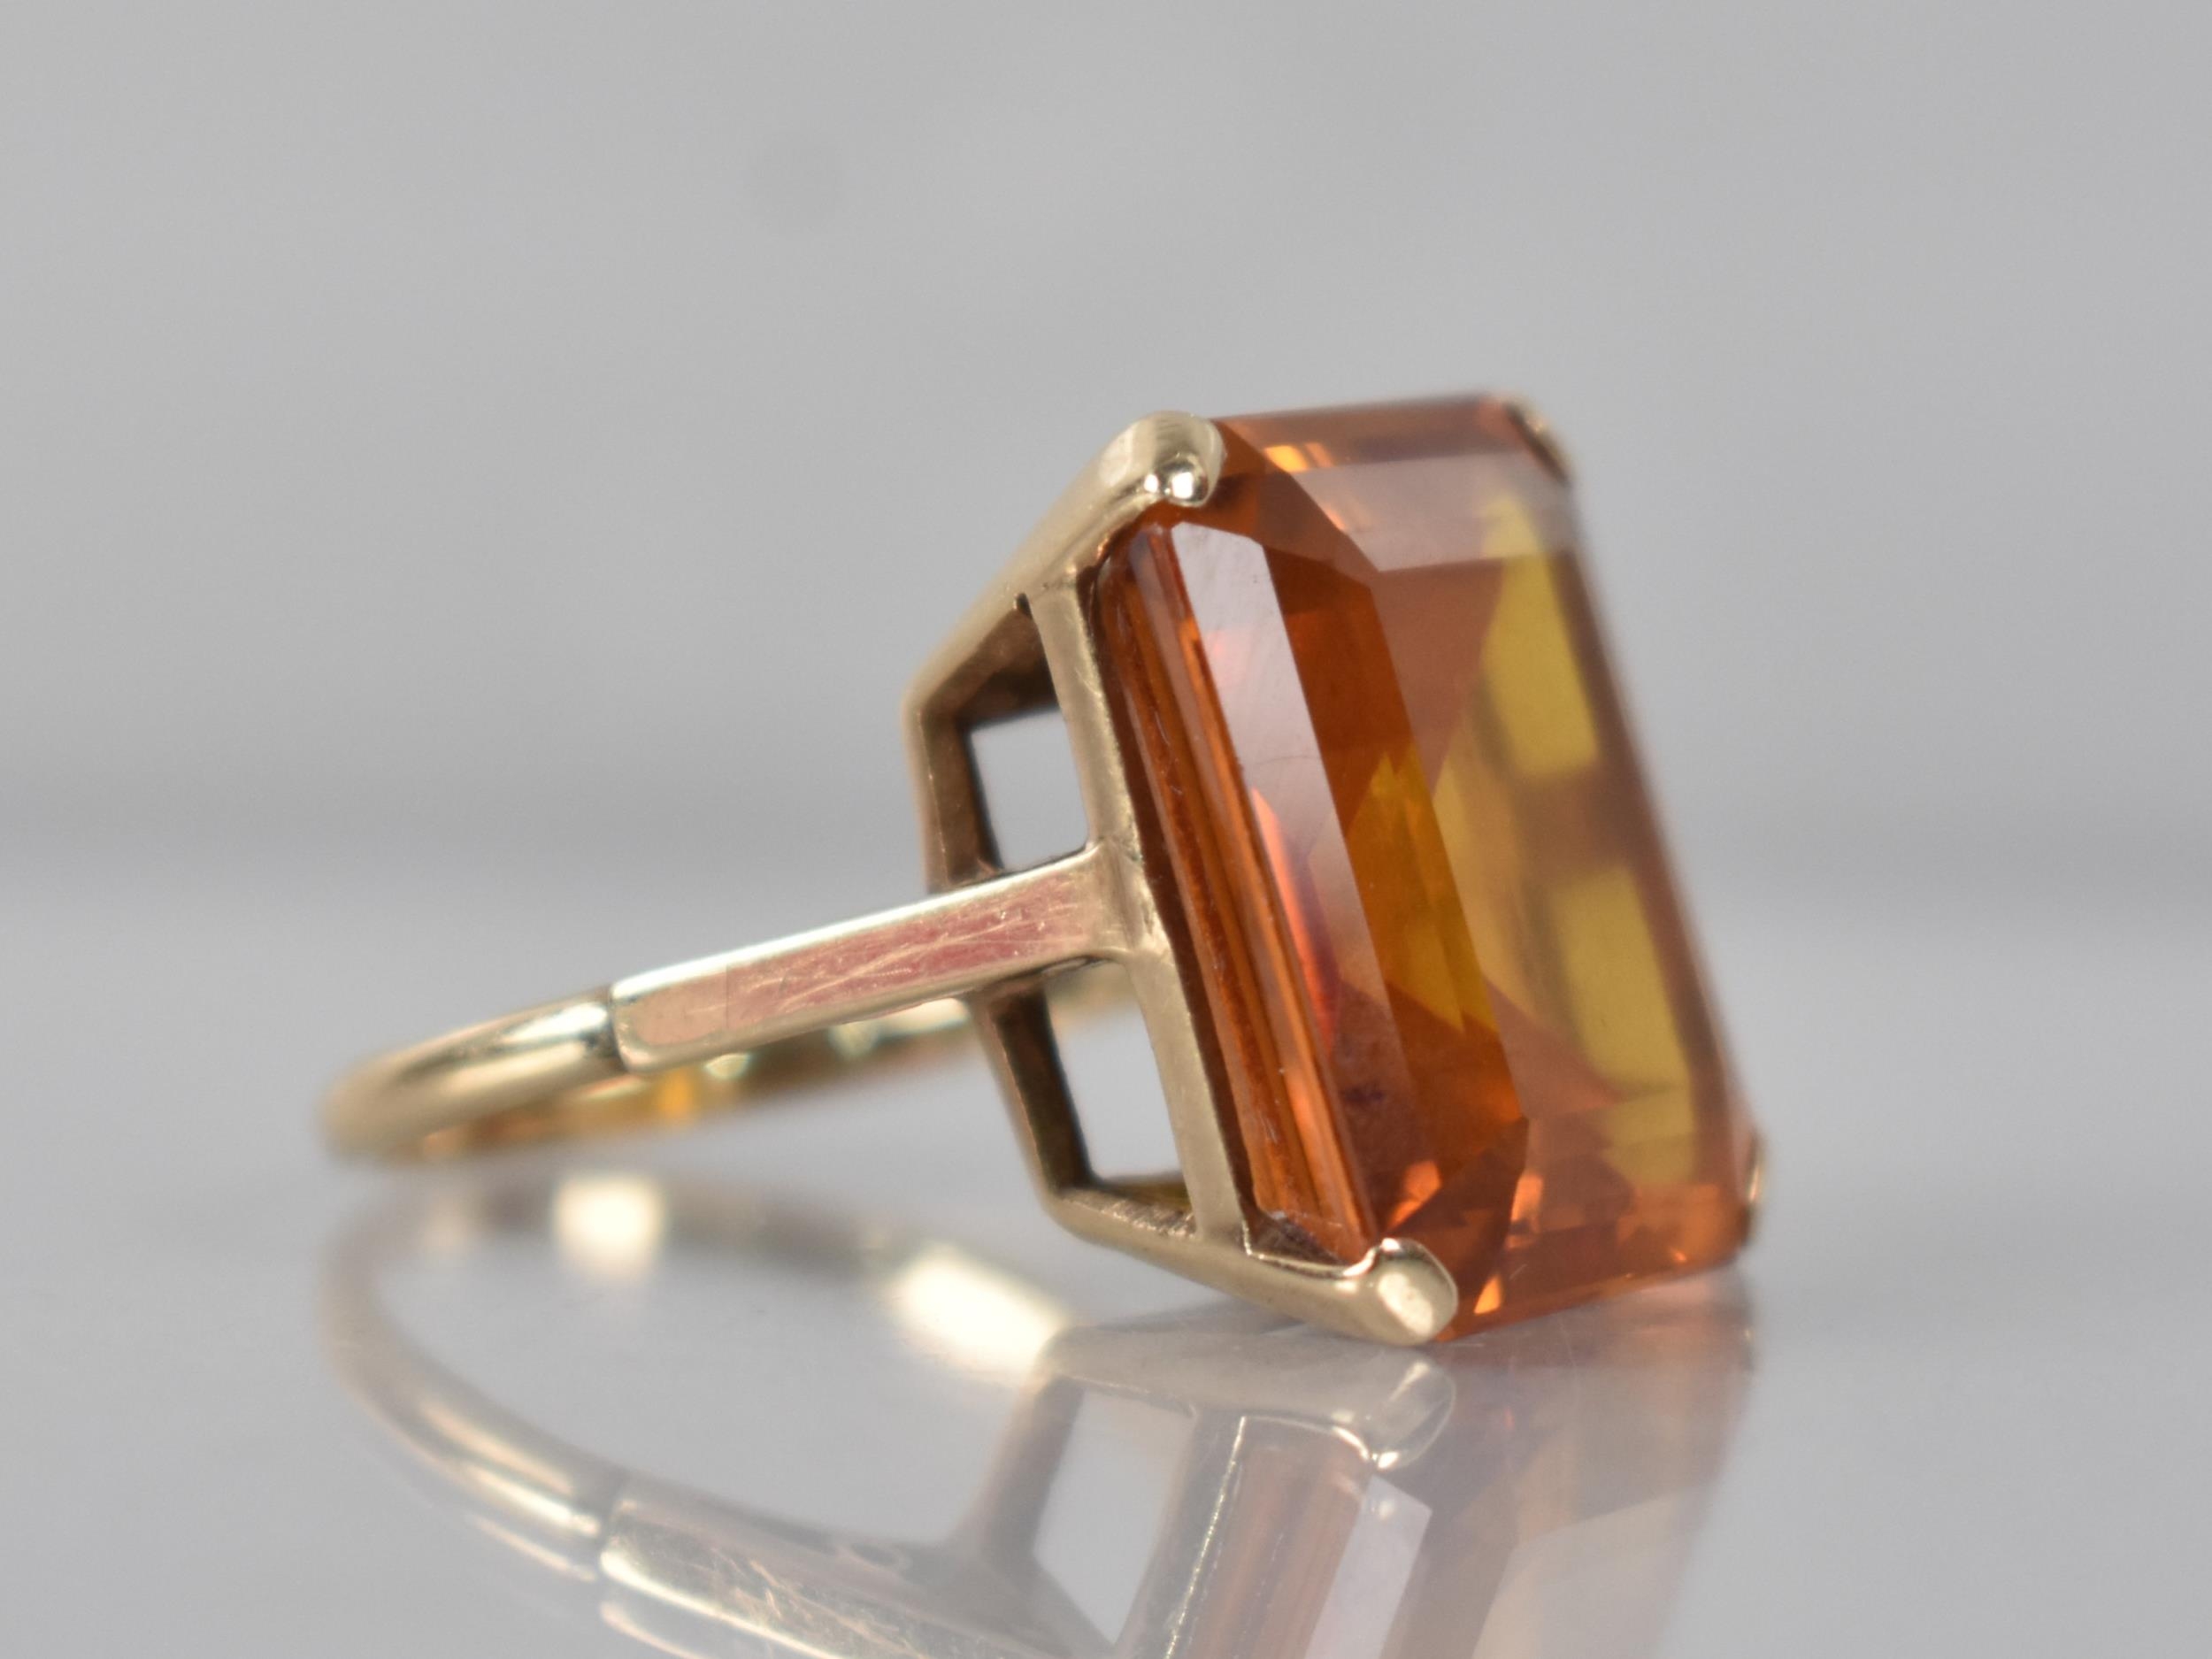 A 9ct Gold and Untested Citrine Type Stone Cocktail Ring, Emerald Cut Stone Measuring 15.9mm by 18. - Image 2 of 3